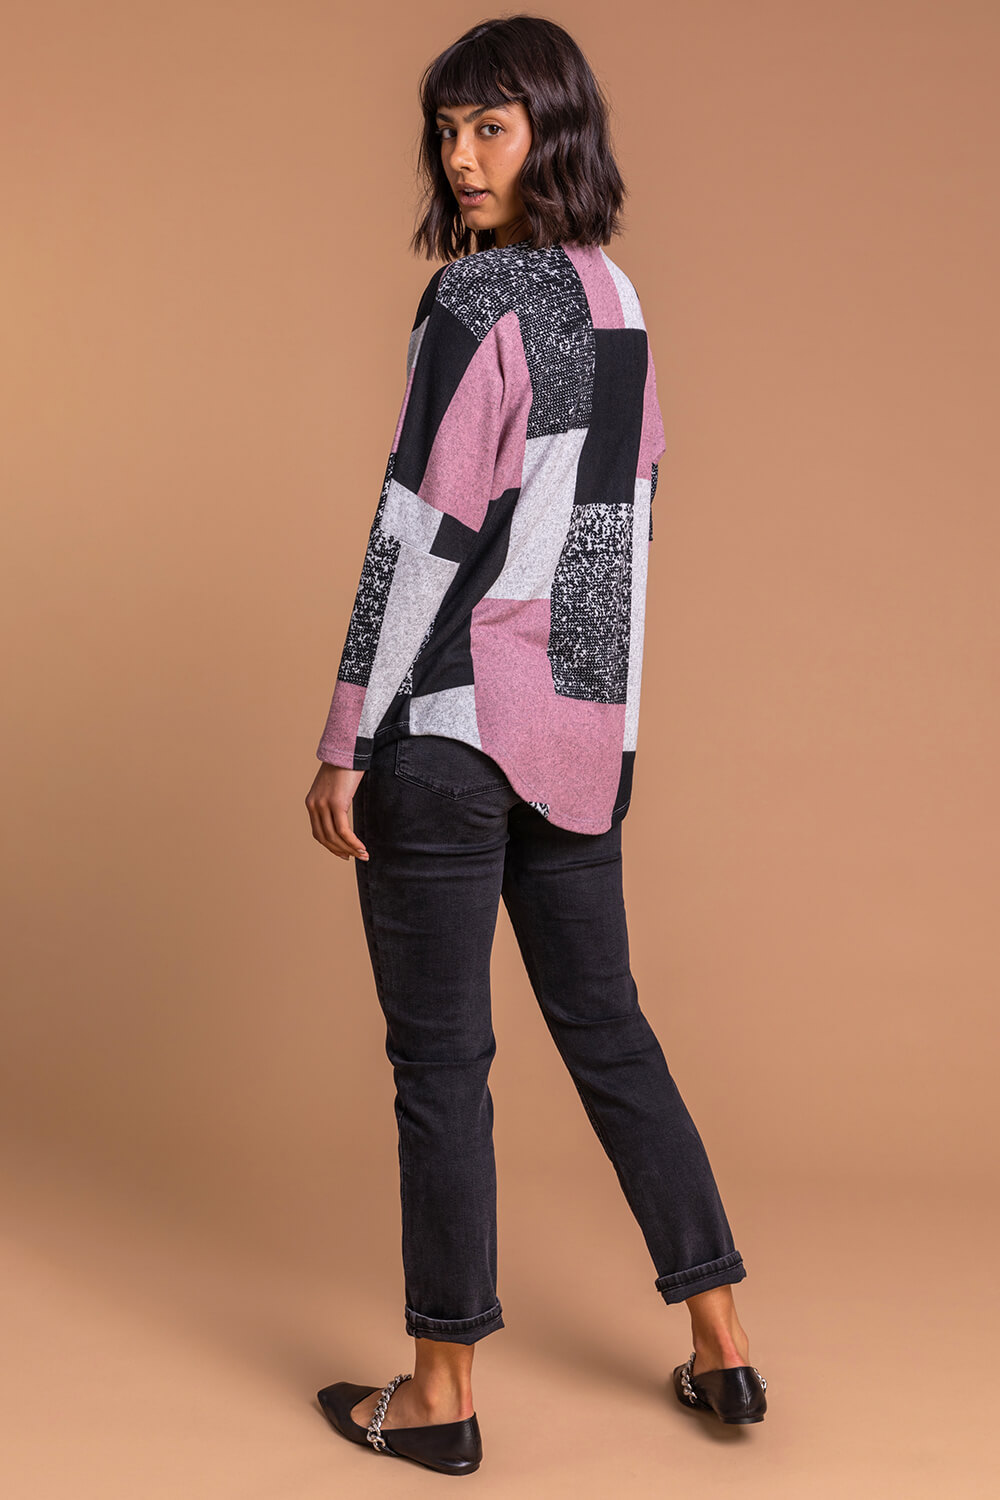 PINK Colour Block V Neck Zip Detail Long Sleeve Top , Image 2 of 5